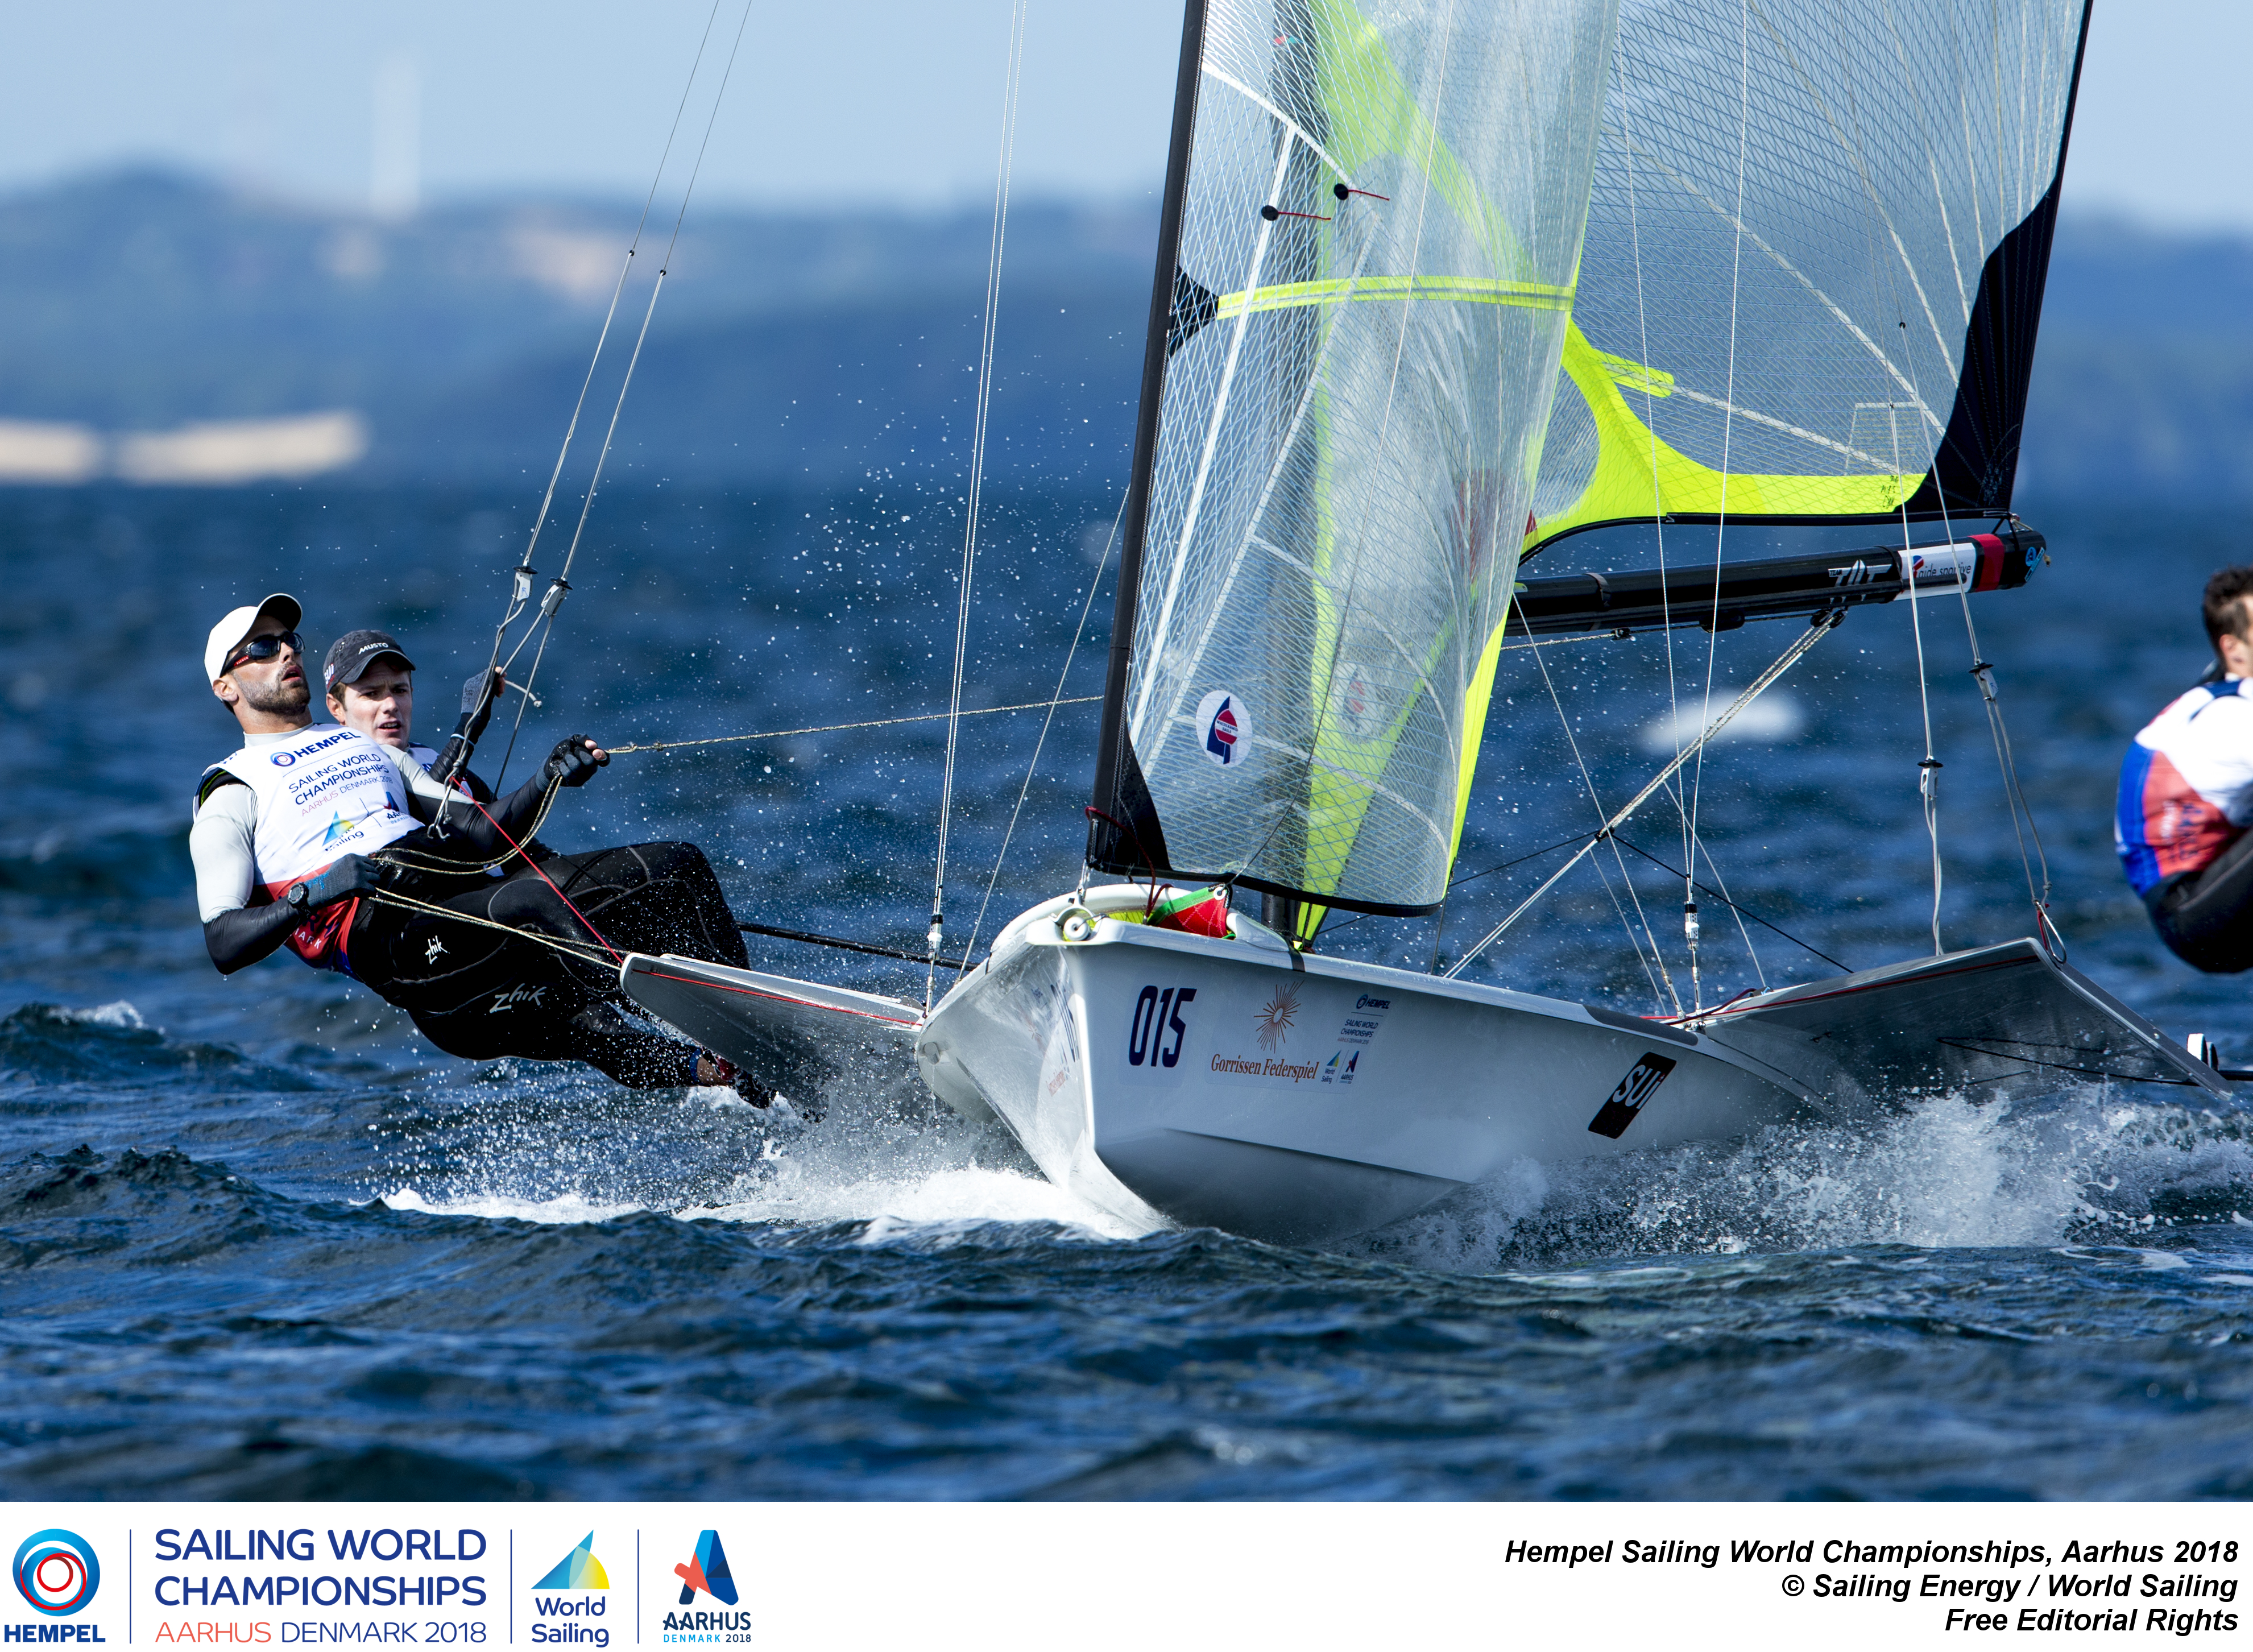  Olympic Classes  World Championships 2018  Aarhus DEN  Day 4  Les Suisses